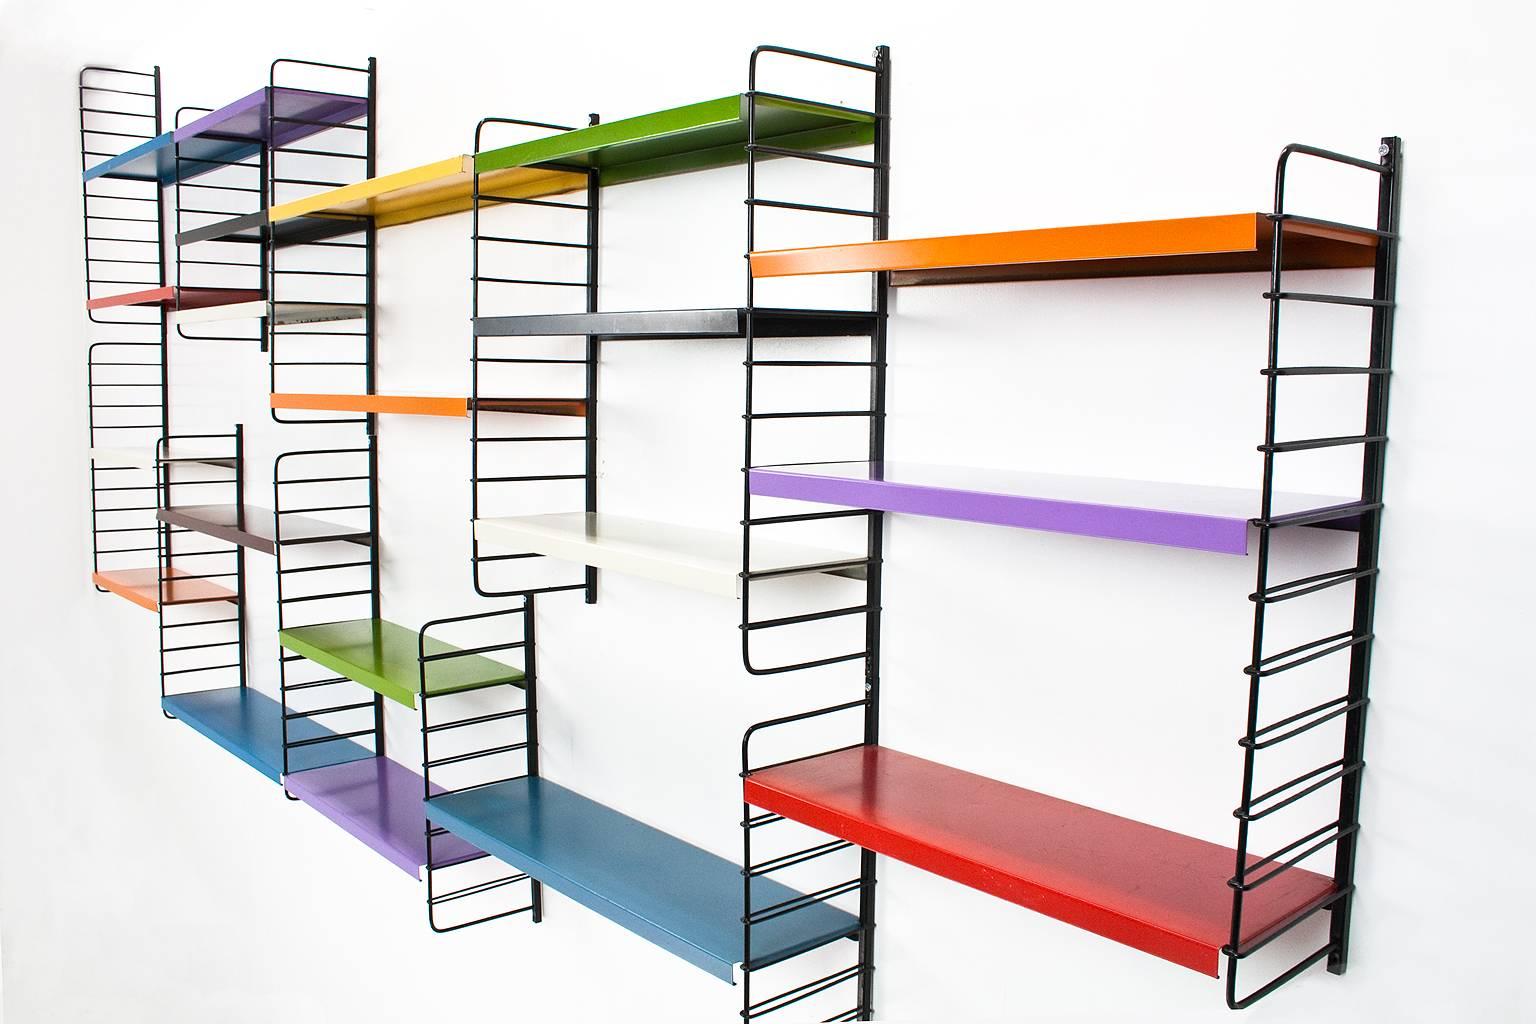 Original Dutch Mid-Century Modern multicolored modular system of Pilastro designed in the 1960s by Tjerk Reijenga in very good condition.

11 black wired uprights in two different heights, 60 and 46.5 cm height and 20 shelves in 2 different widths